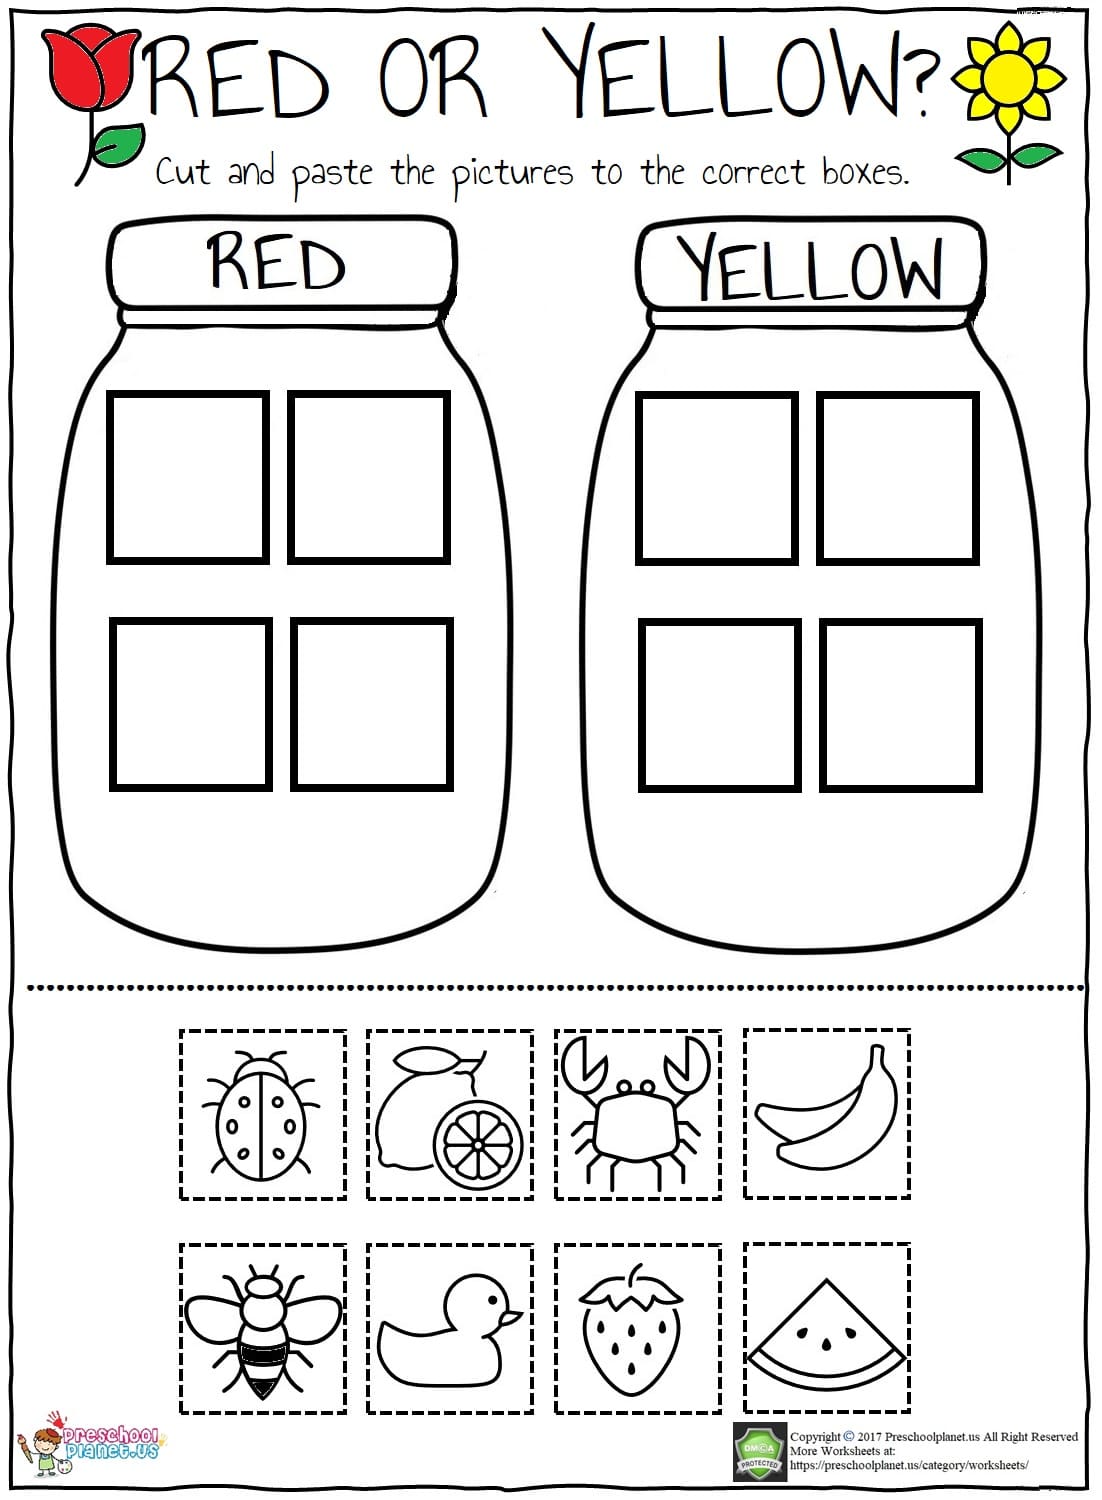 Red or Yellow Worksheet